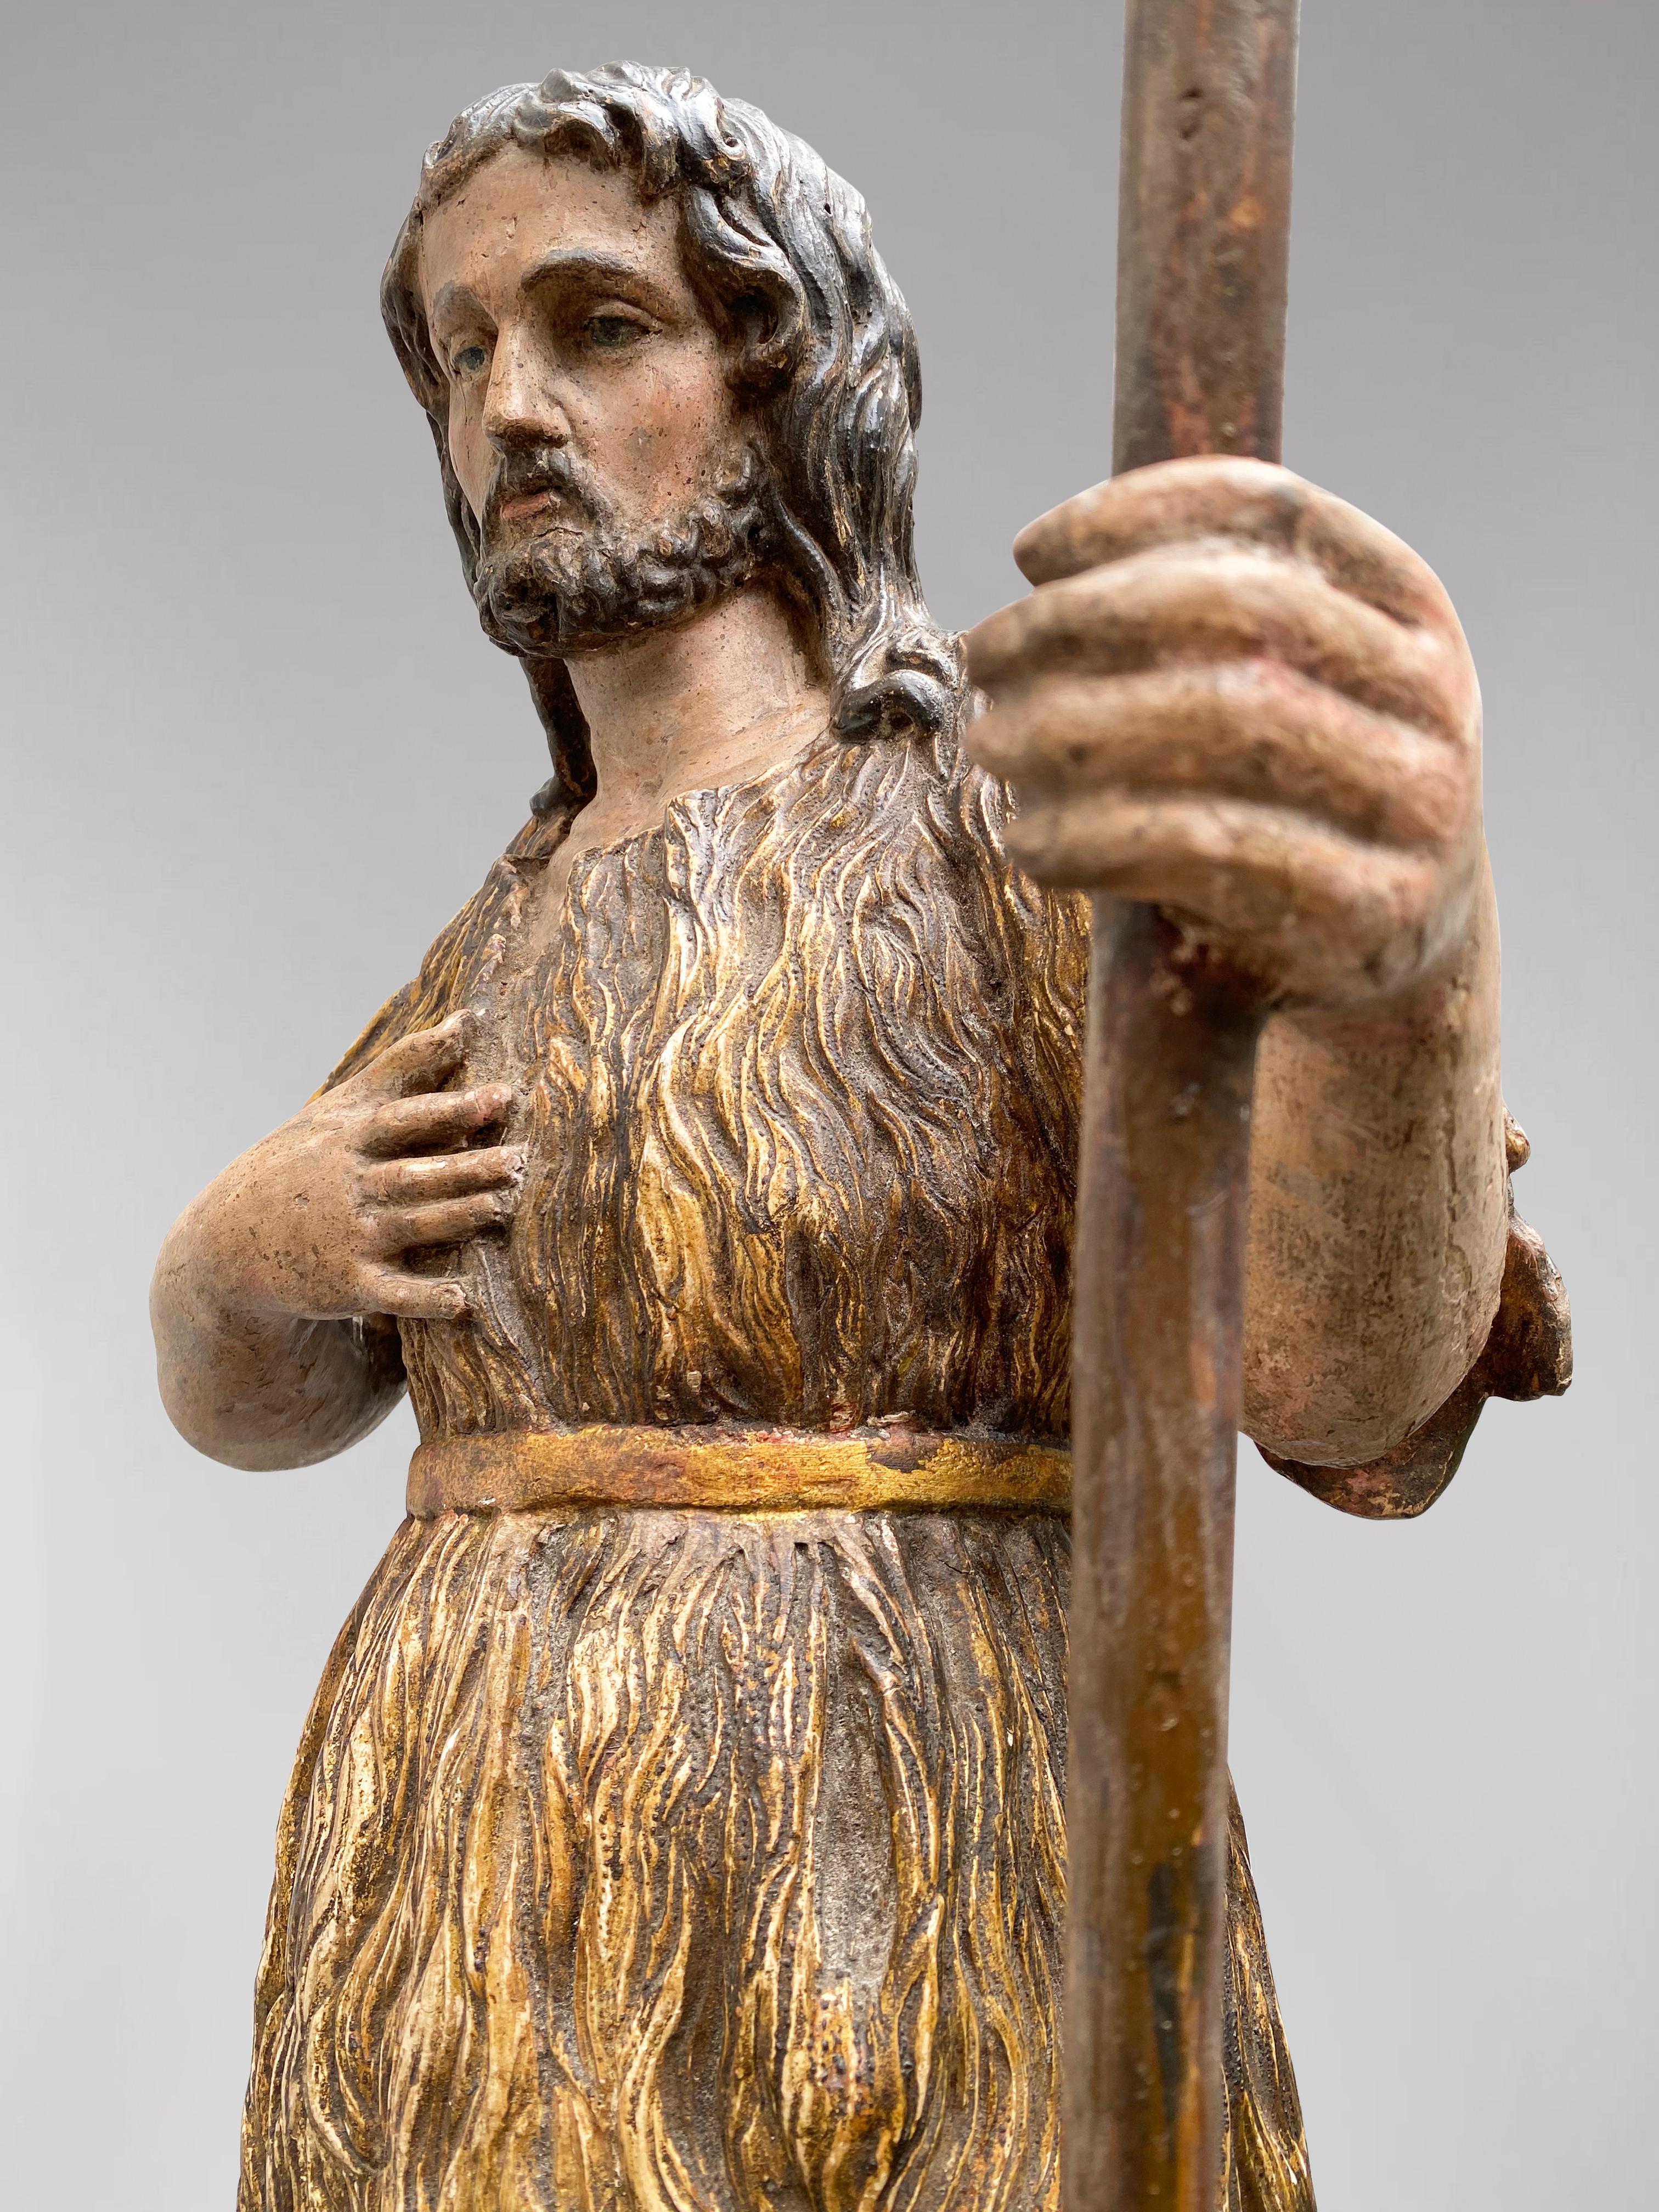 Description: A French Statue of Saint John the Baptist with Staff and Lamb on his Feet, Circa 1700, polychromed wood

Statue: Shepherd with Lamb on his Feet
Object Type: Religious Statuette
Artist, Sculptor / Maker: Unknown
Place of Origin: